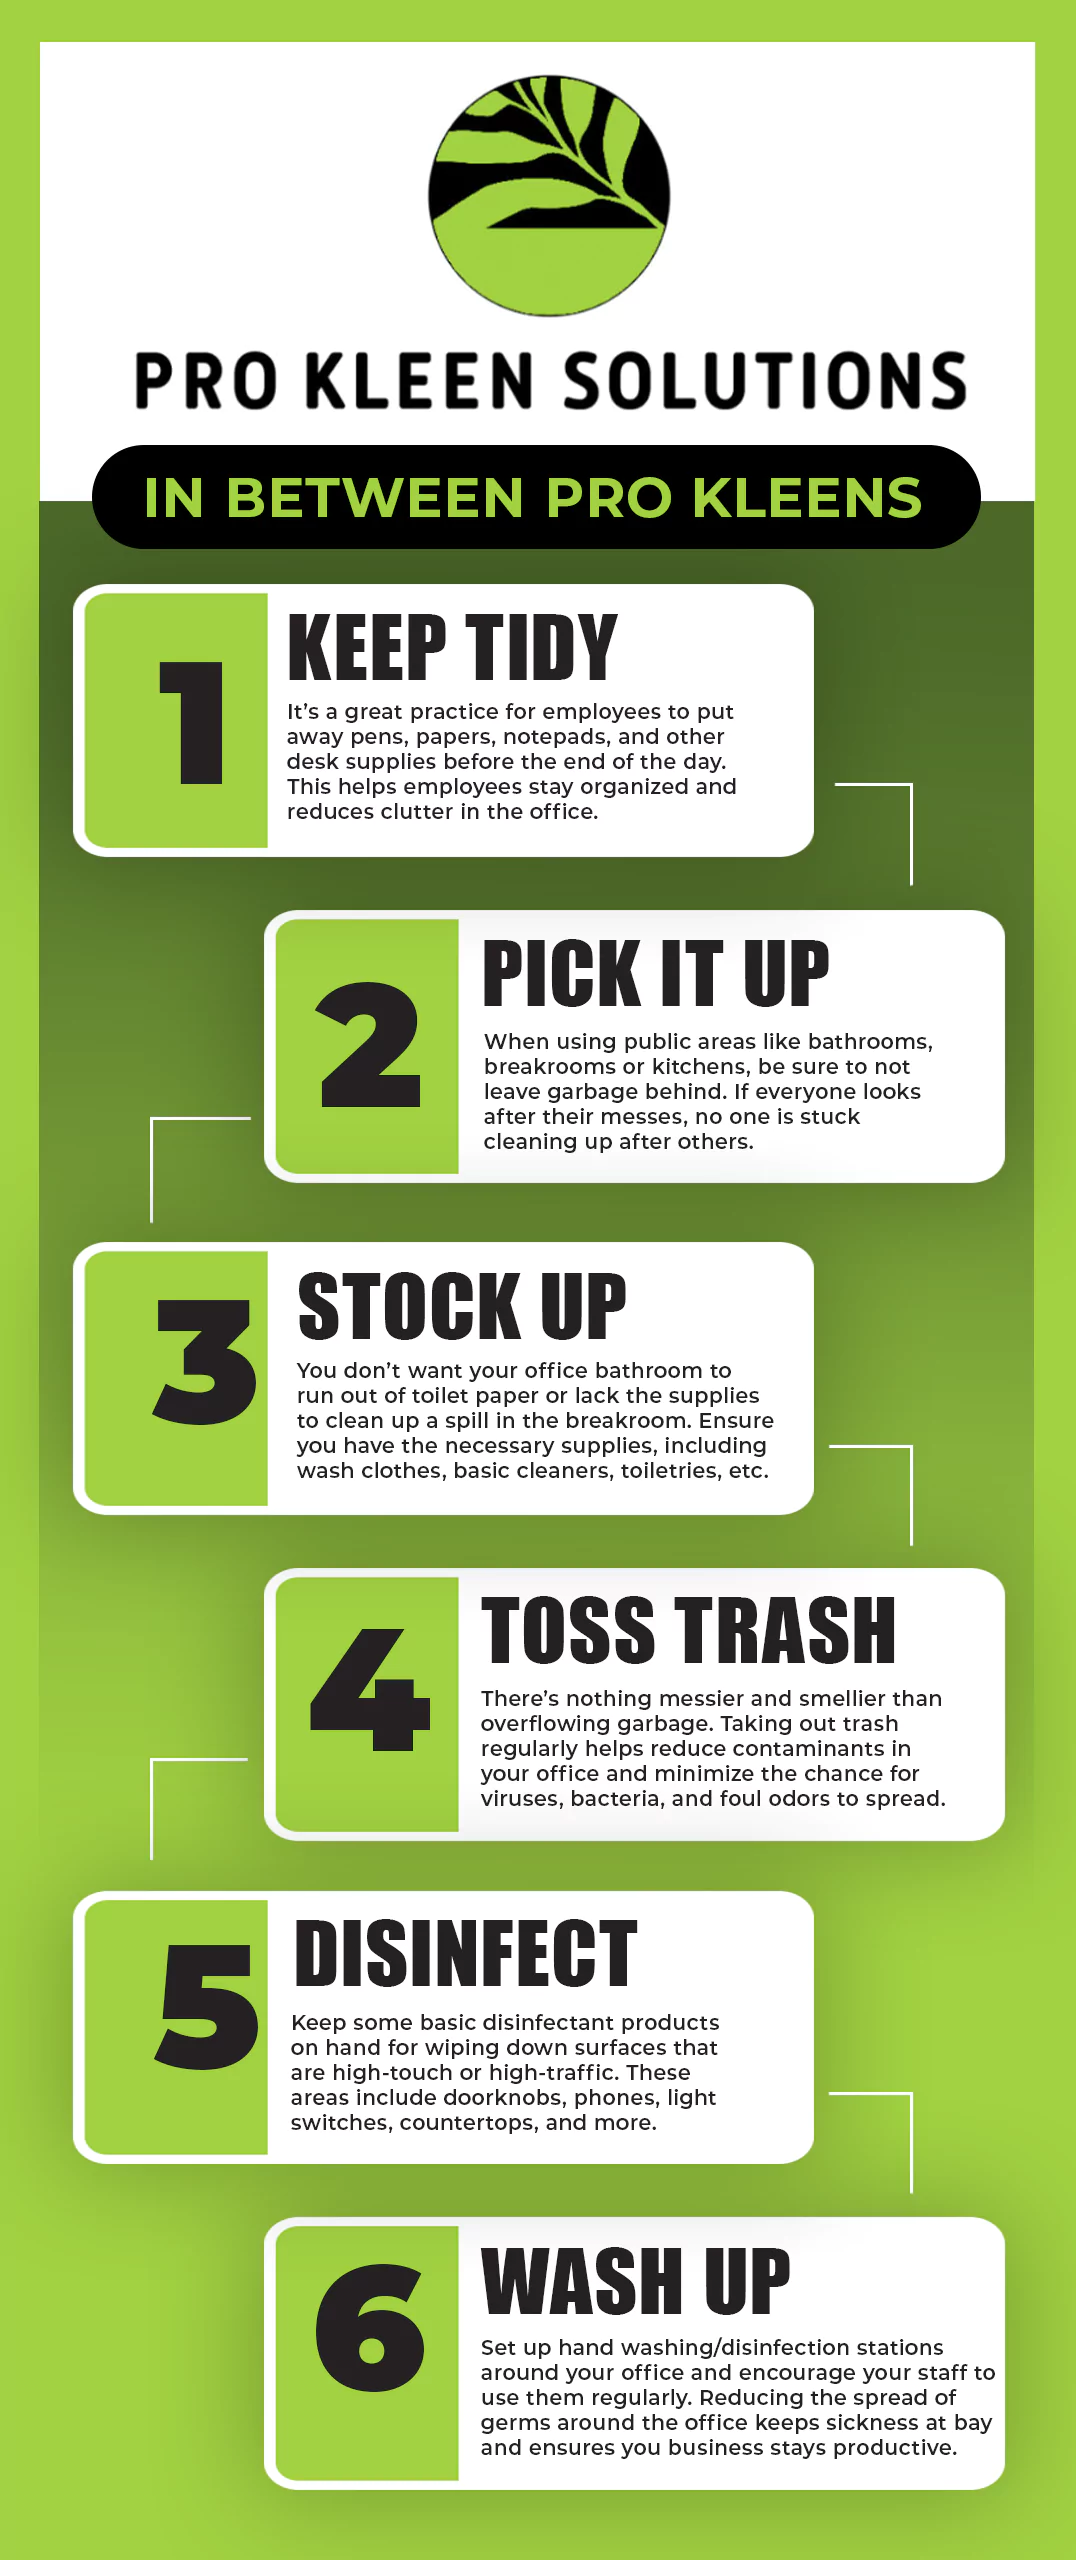 Office Cleaning Tips from Pro Kleen Solutions